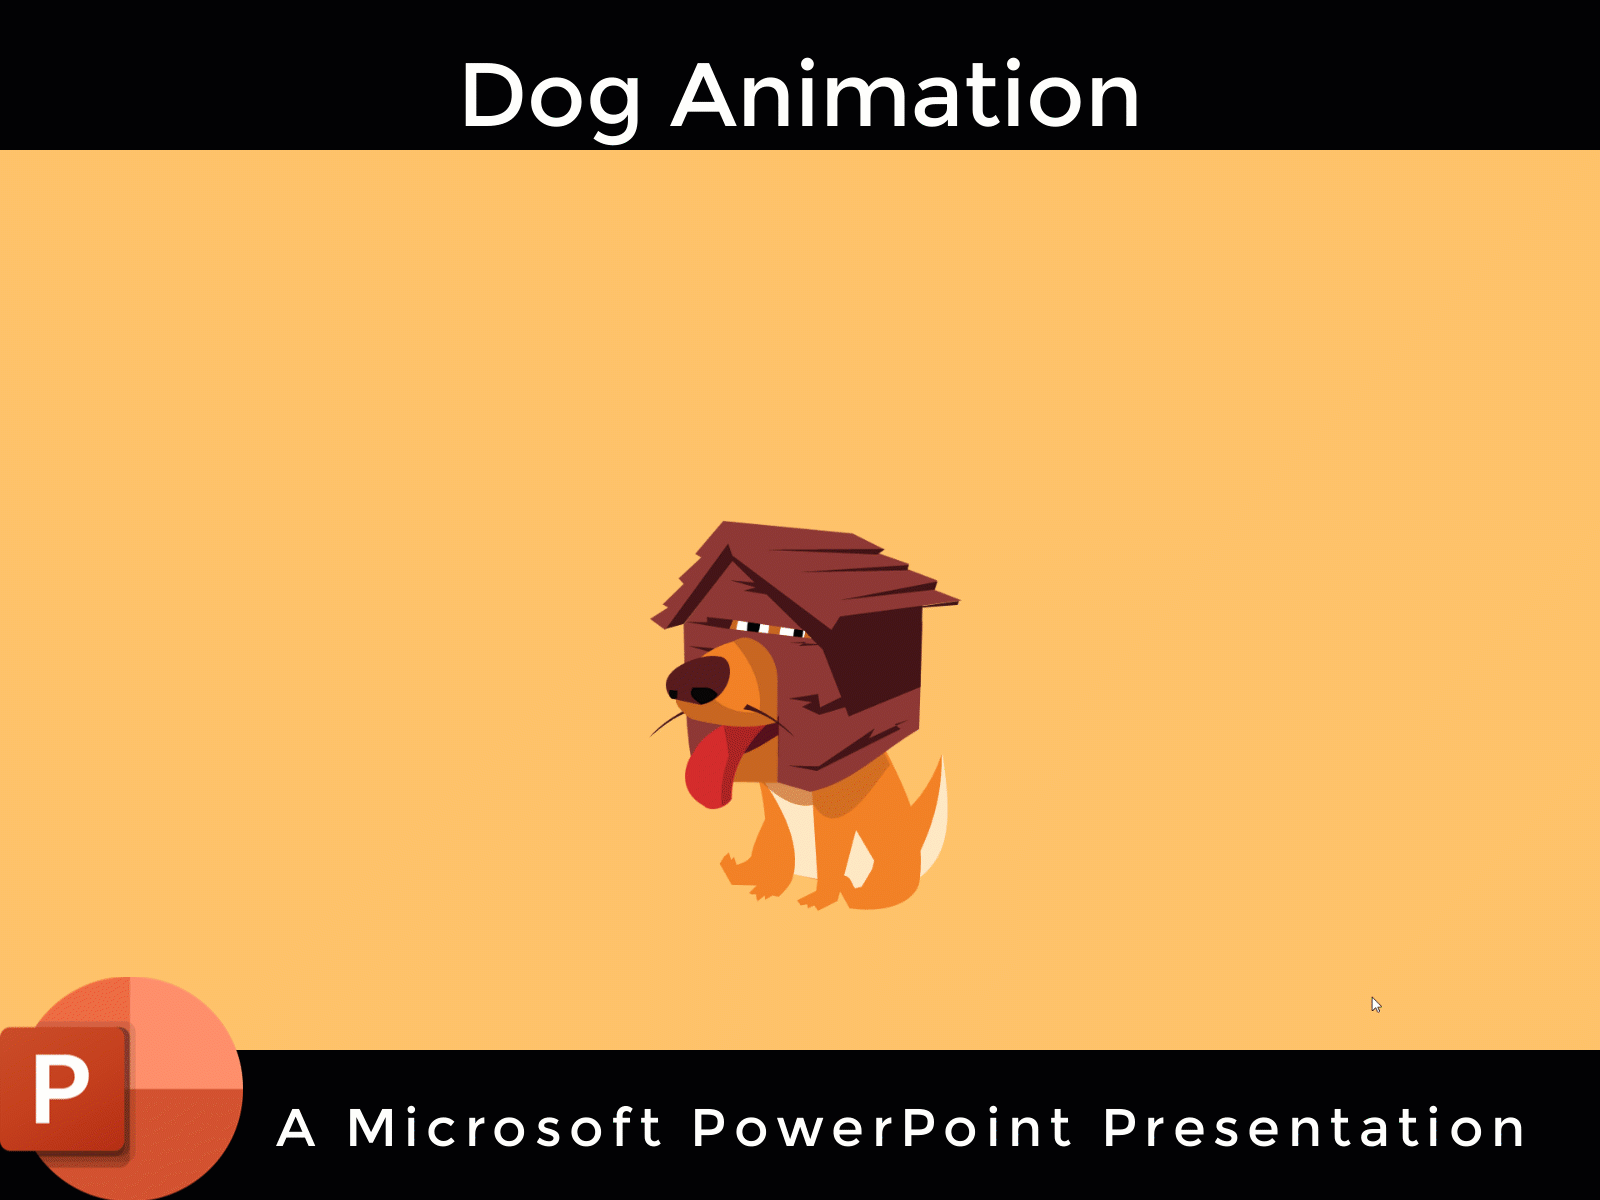 Dog Animation in Microsoft PowerPoint by The Teacher on Dribbble